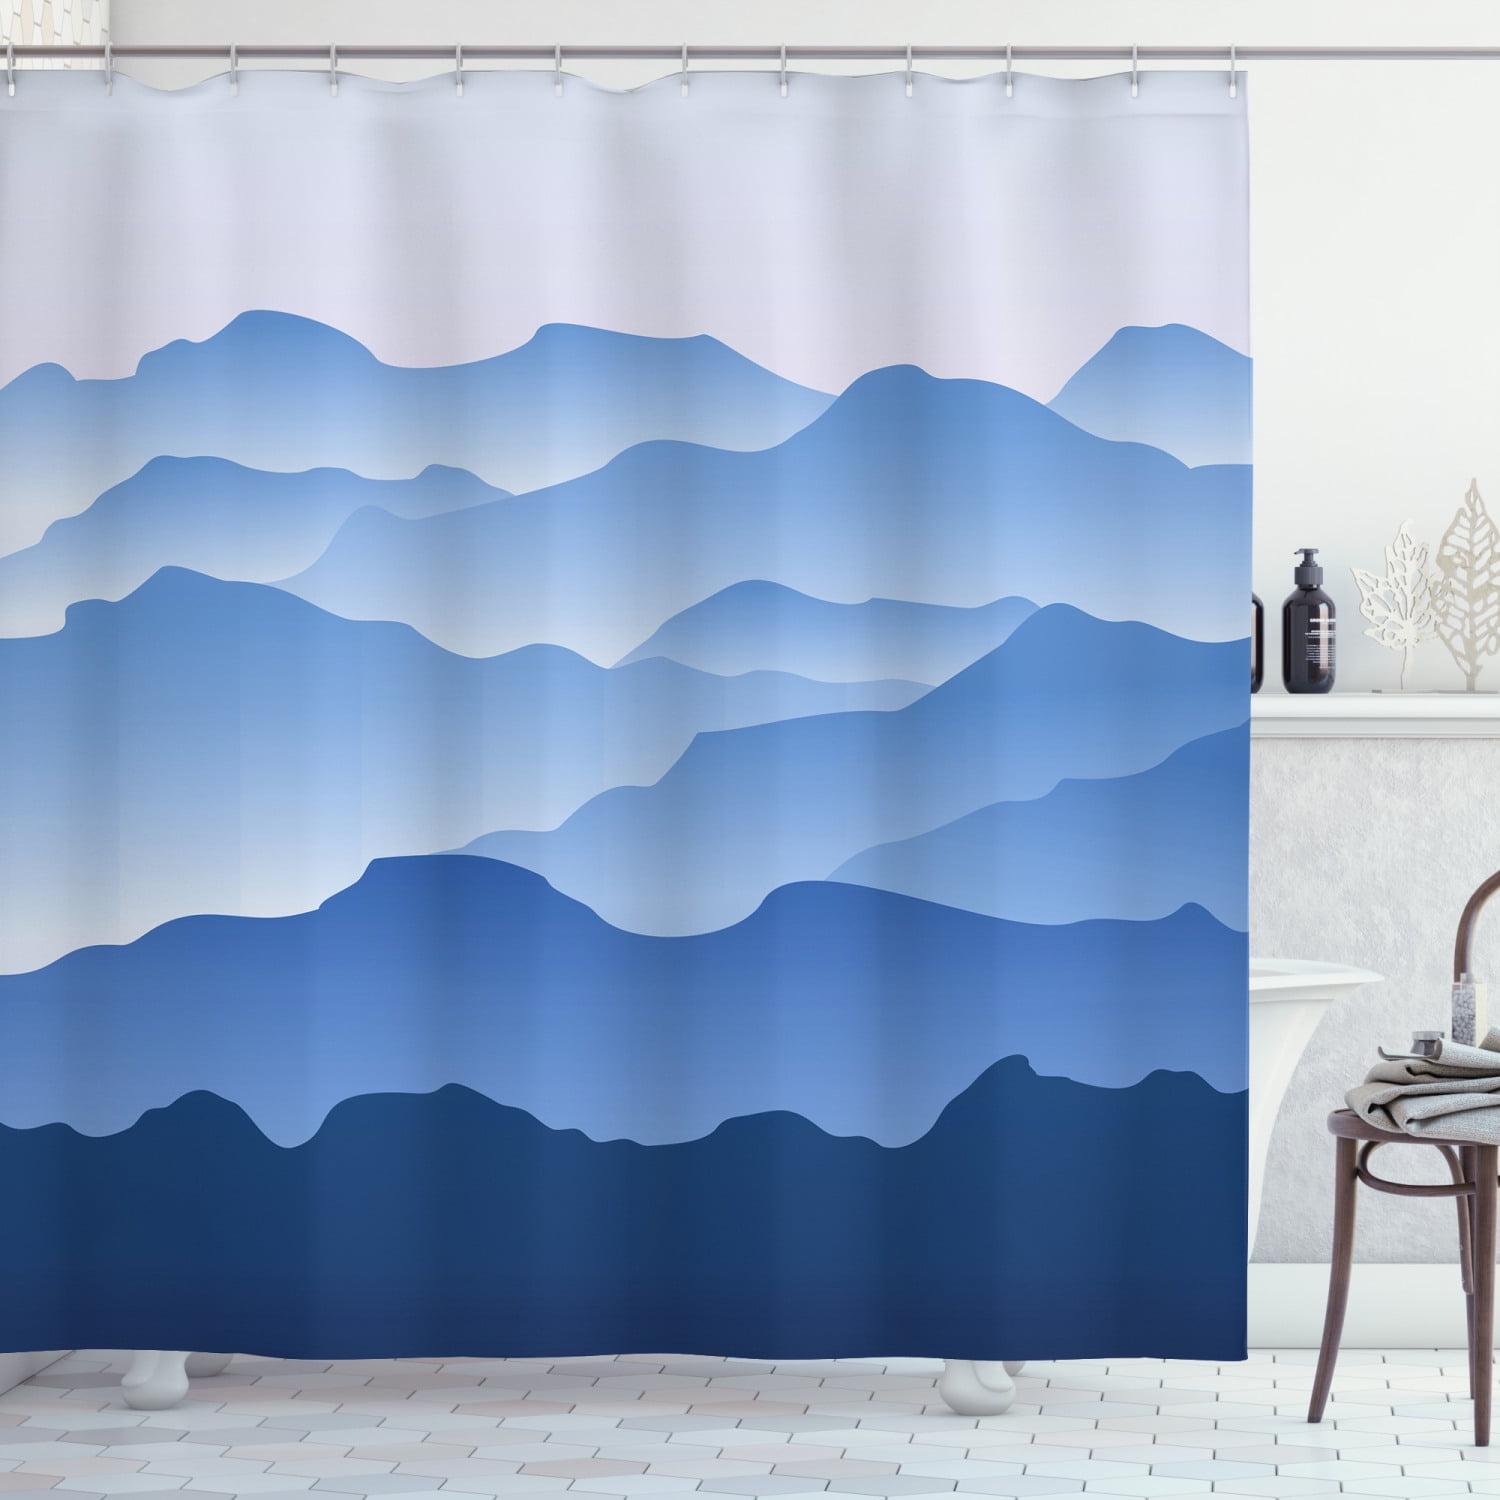 Details about   Winter Mountain House Shower Curtain Fabric Set 71in 12hooks & Bath Mat 